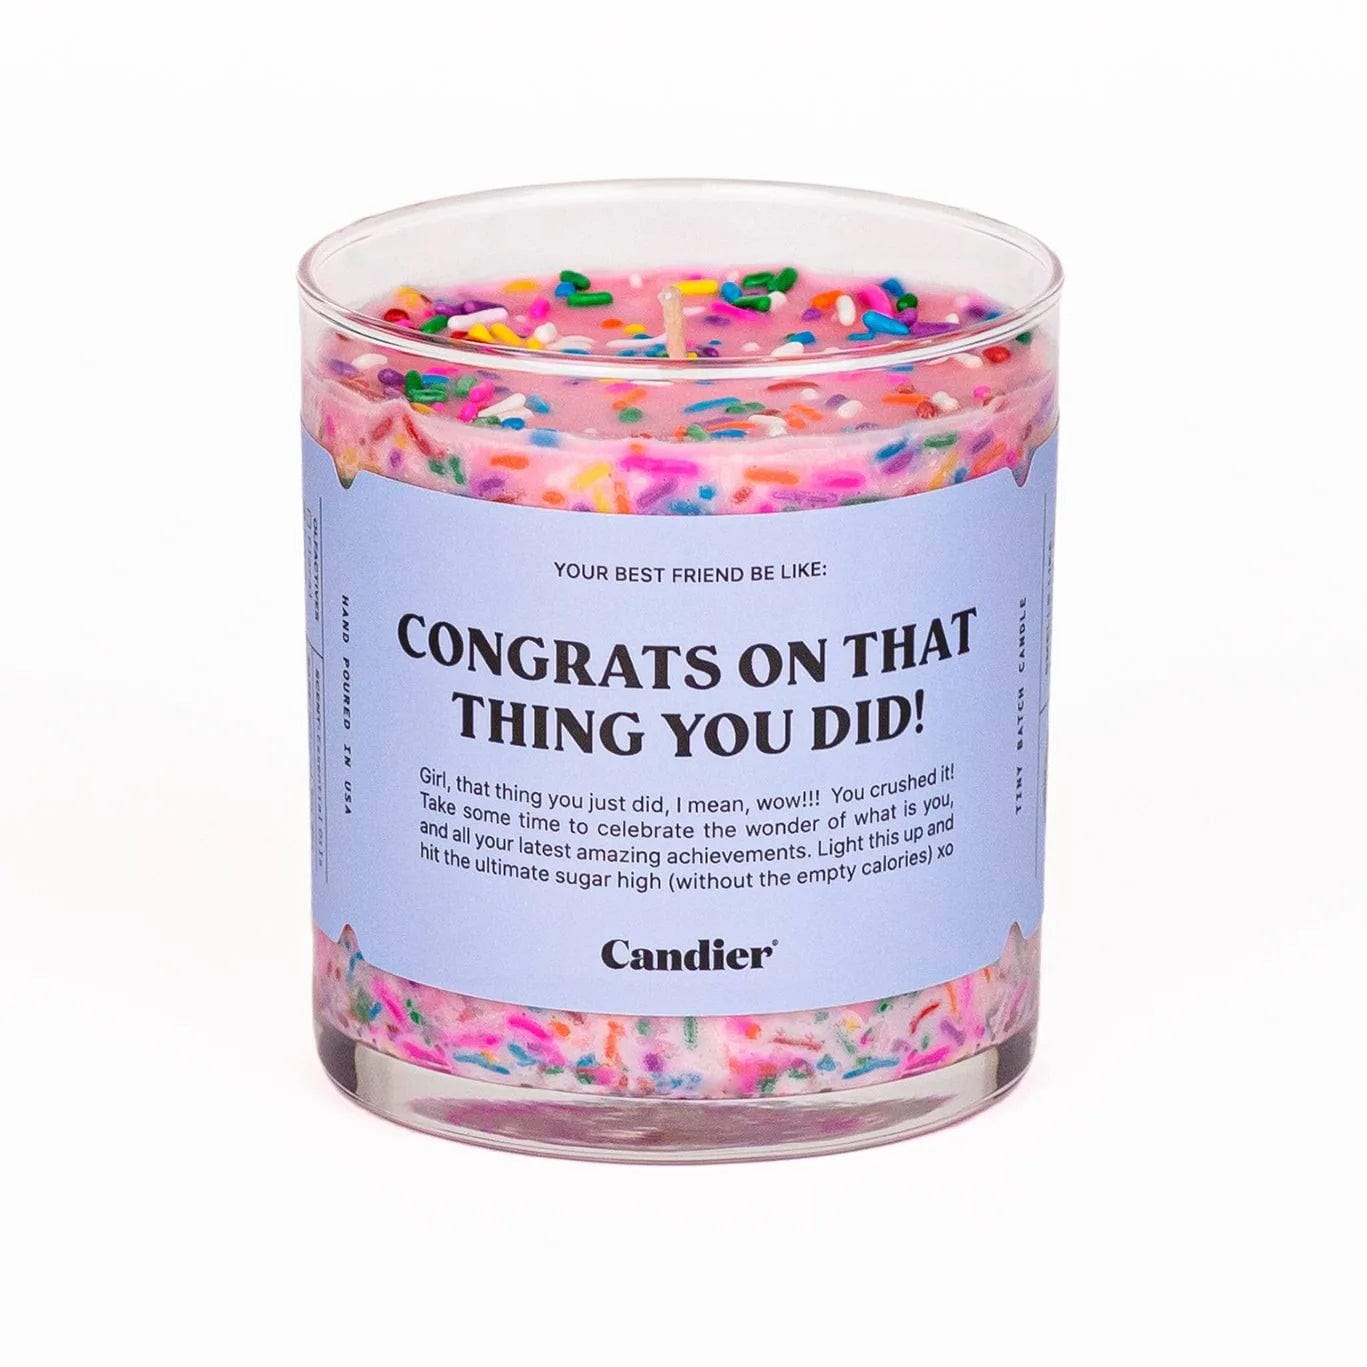 Ryan Porter Congrats On That Thing You Did Candle crushed it